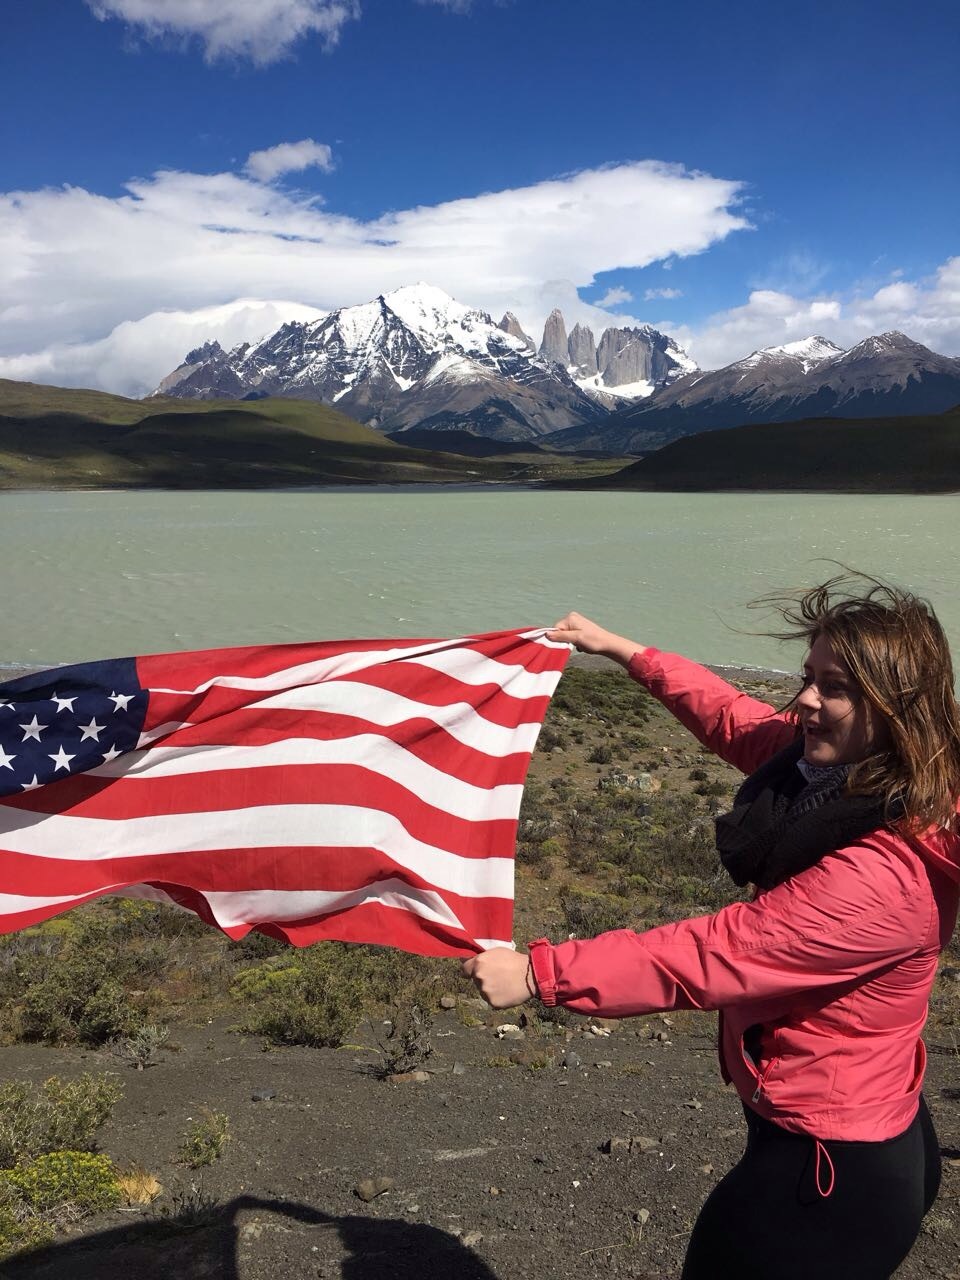 Hailey Weidman lets her American flag flap in the wind at Patagonia.